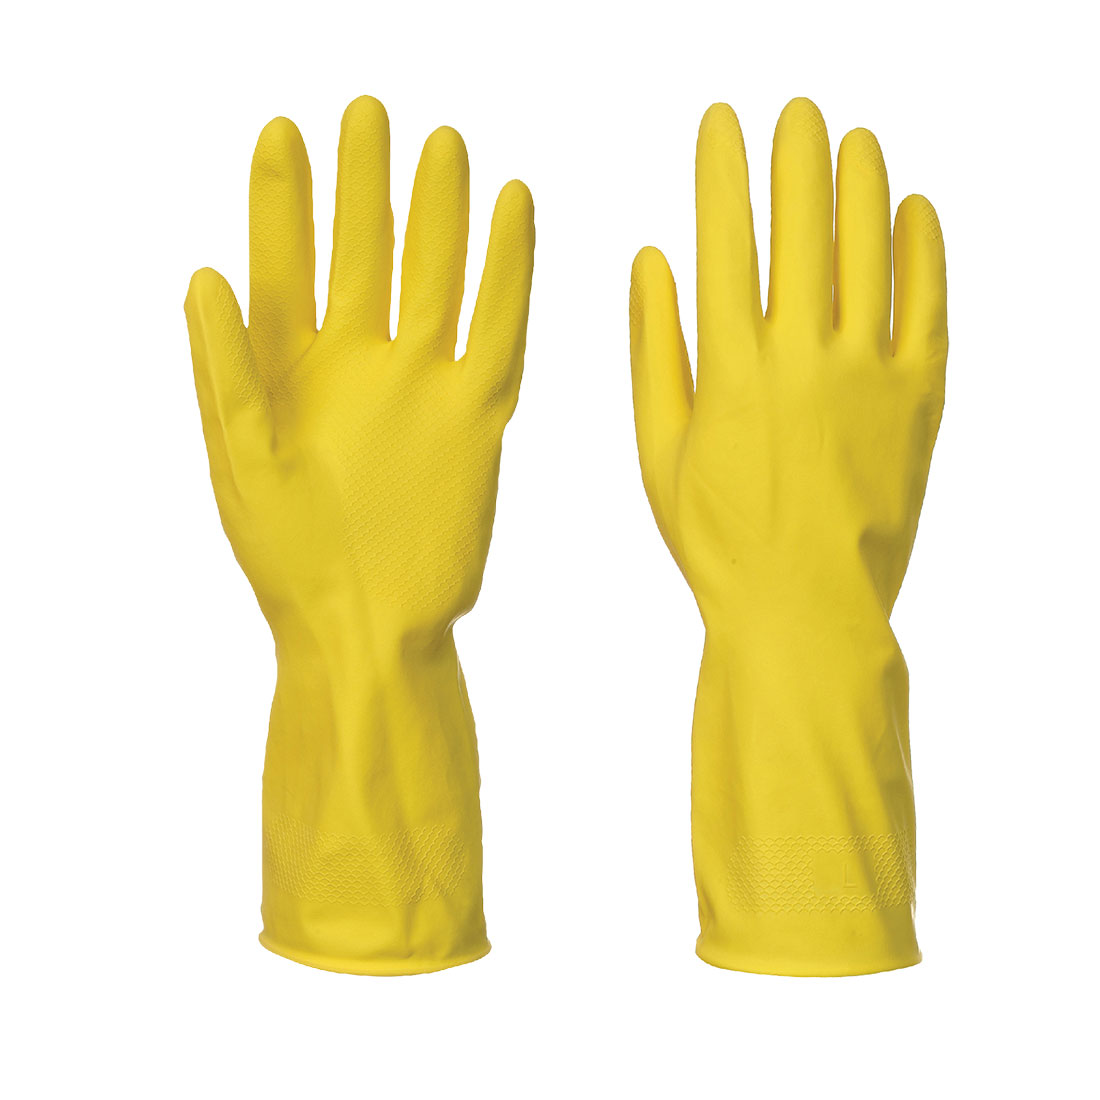 Household Latex Glove (240 Pairs) Re-usable Gloves A800